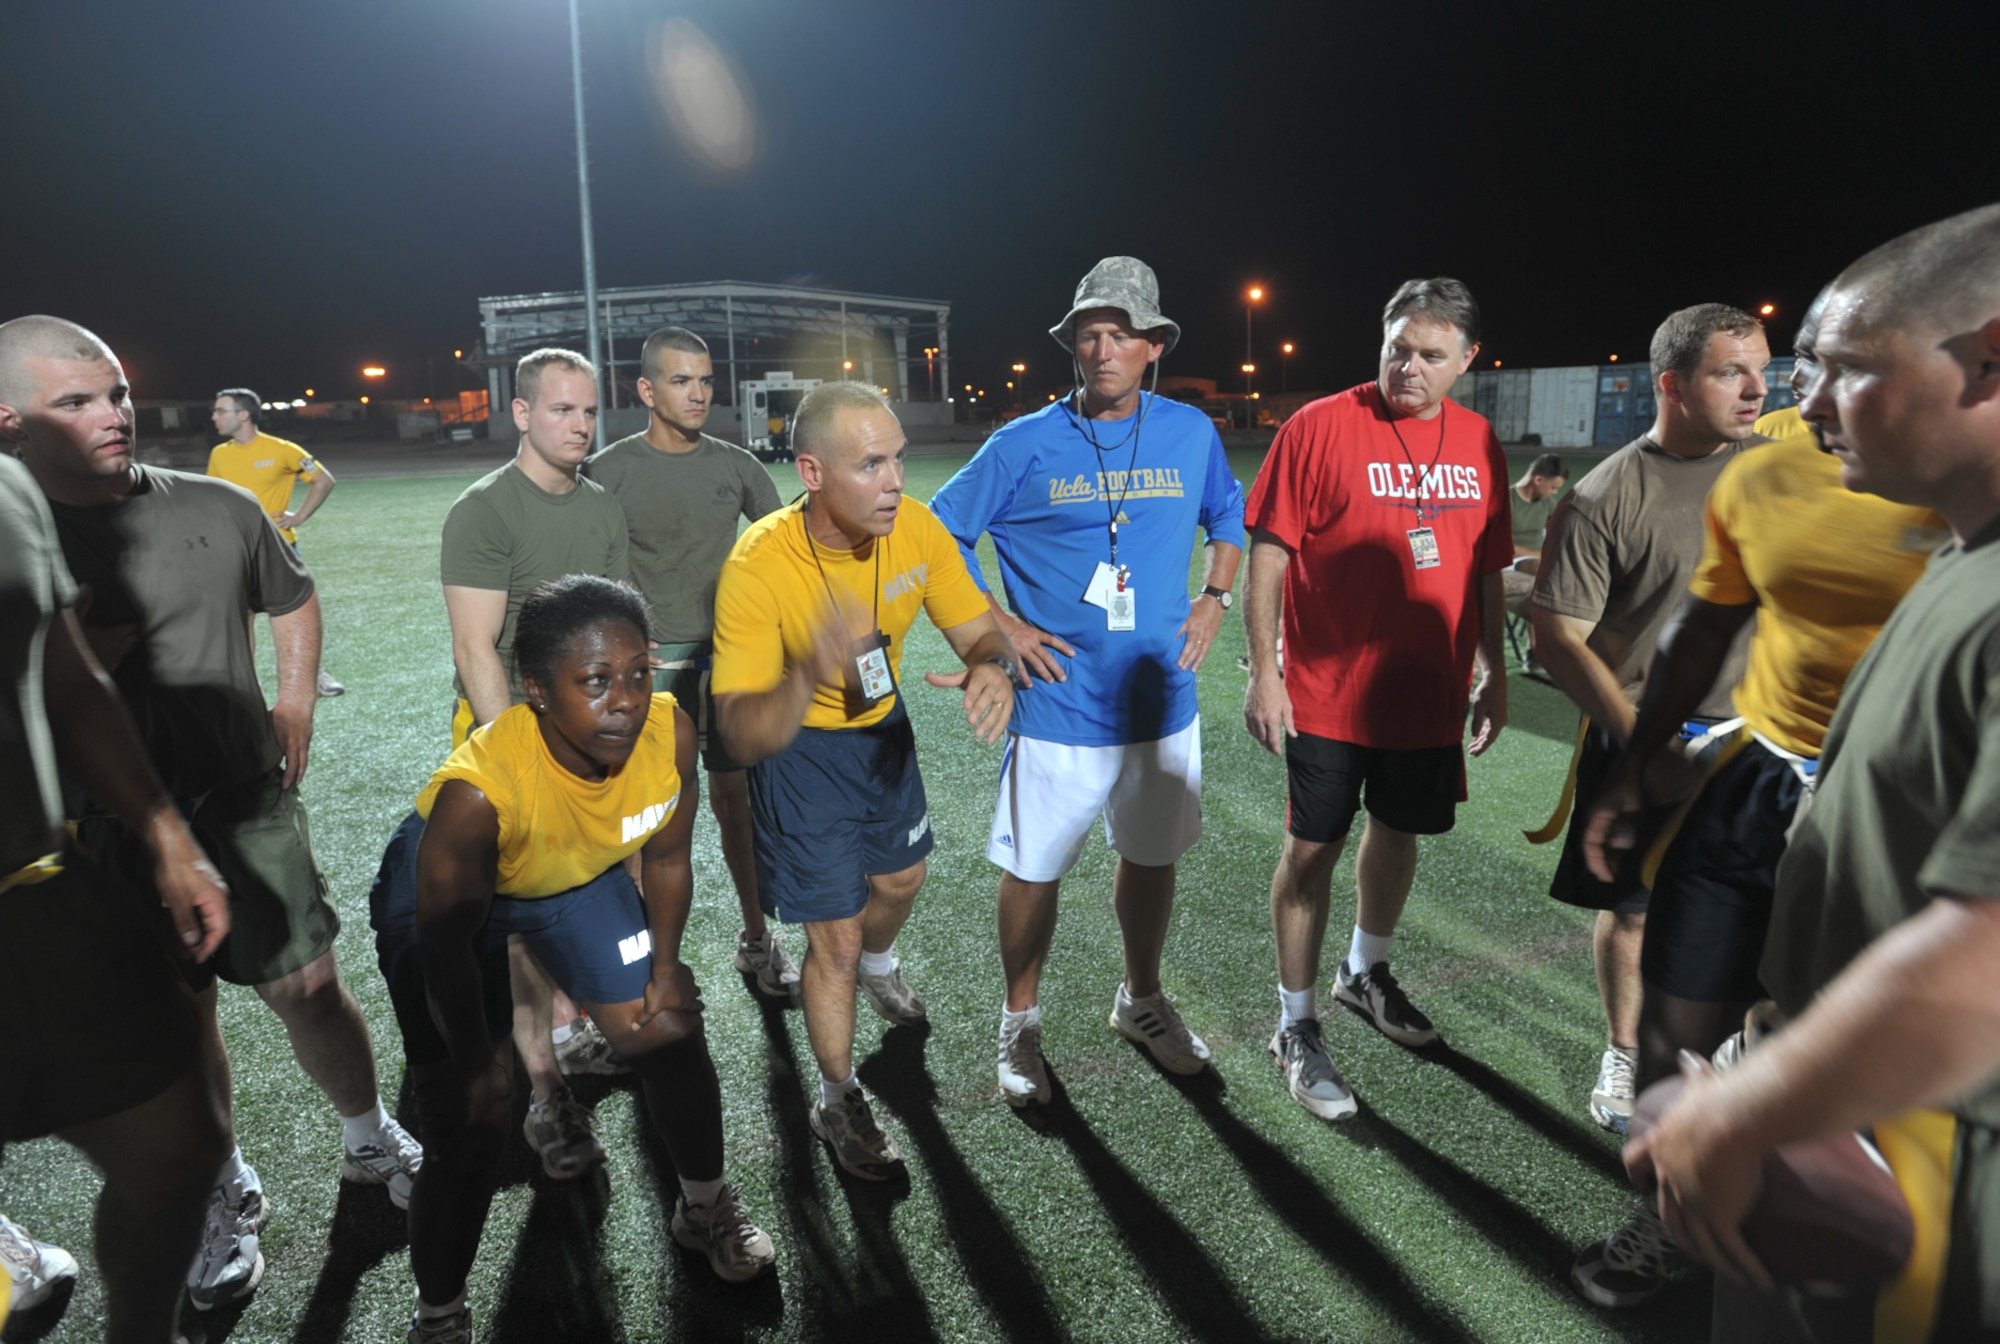 NCAA football coaches Rick Neuheisel of UCLA and Houston Nutt of Ole Miss listen in on a huddle during an Air Force/Army vs. Marines/Navy football game at Camp Lemonier in Djibouti, Africa on June 2. The visit to the camp was part of Coaches Tour 2009, a morale-boosting mission that brought seven NCAA coaches to U.S. servicemembers. (U.S. Air Force photo/Tech. Sgt. Jason Schaap)